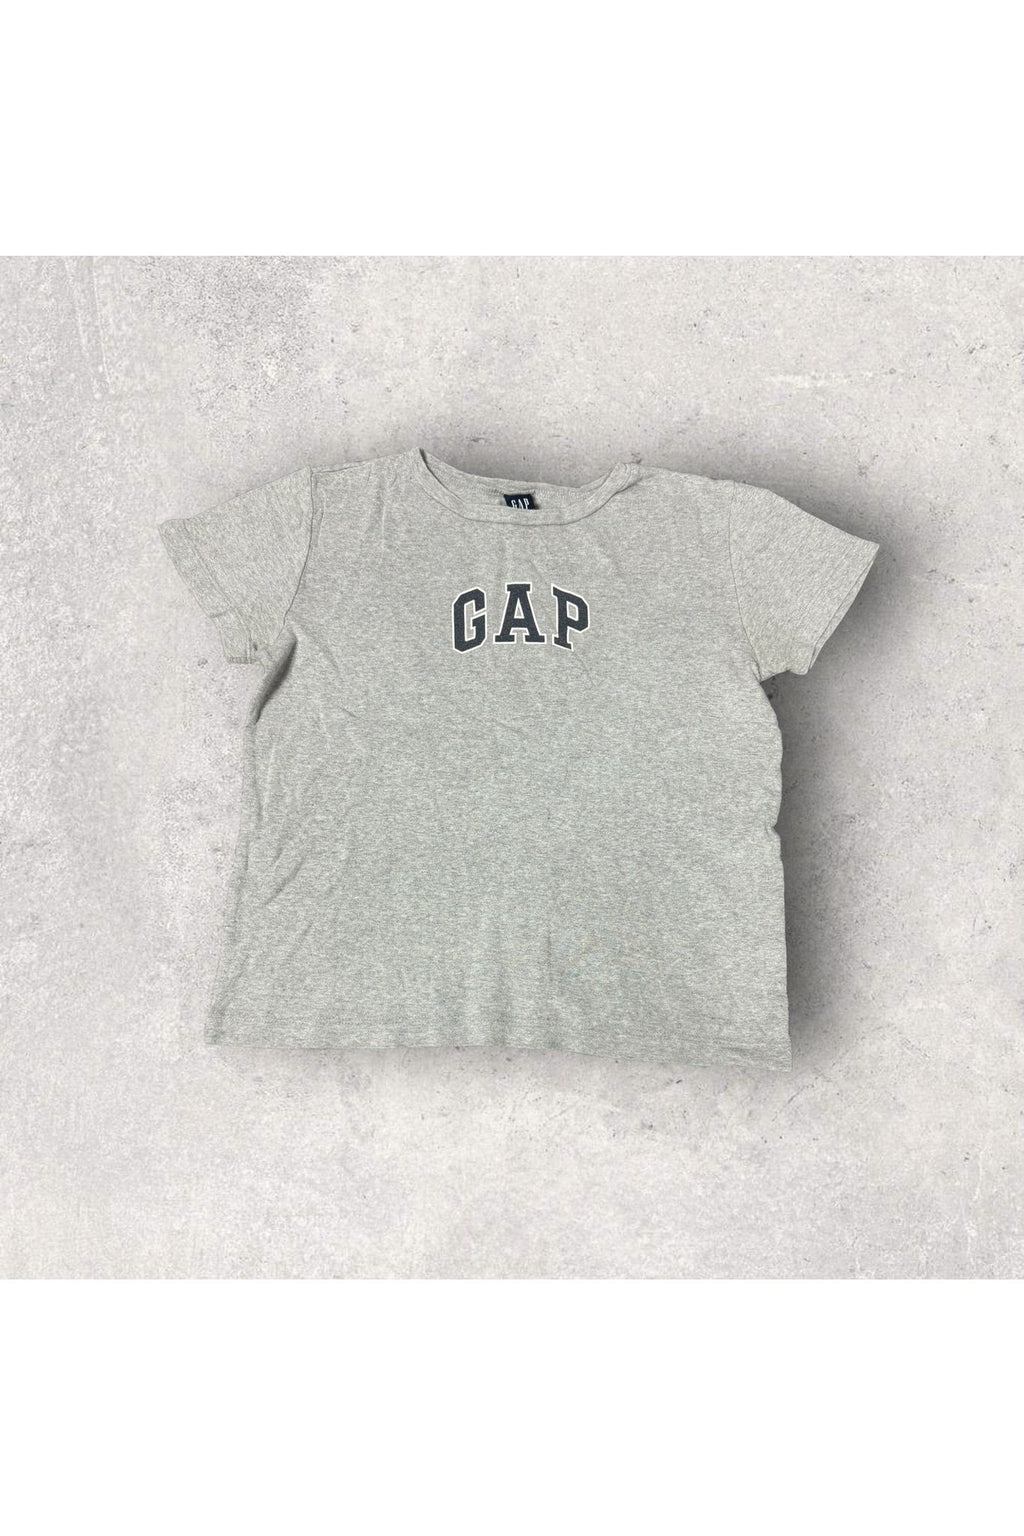 Vintage Made In USA Womens GAP Tee- M